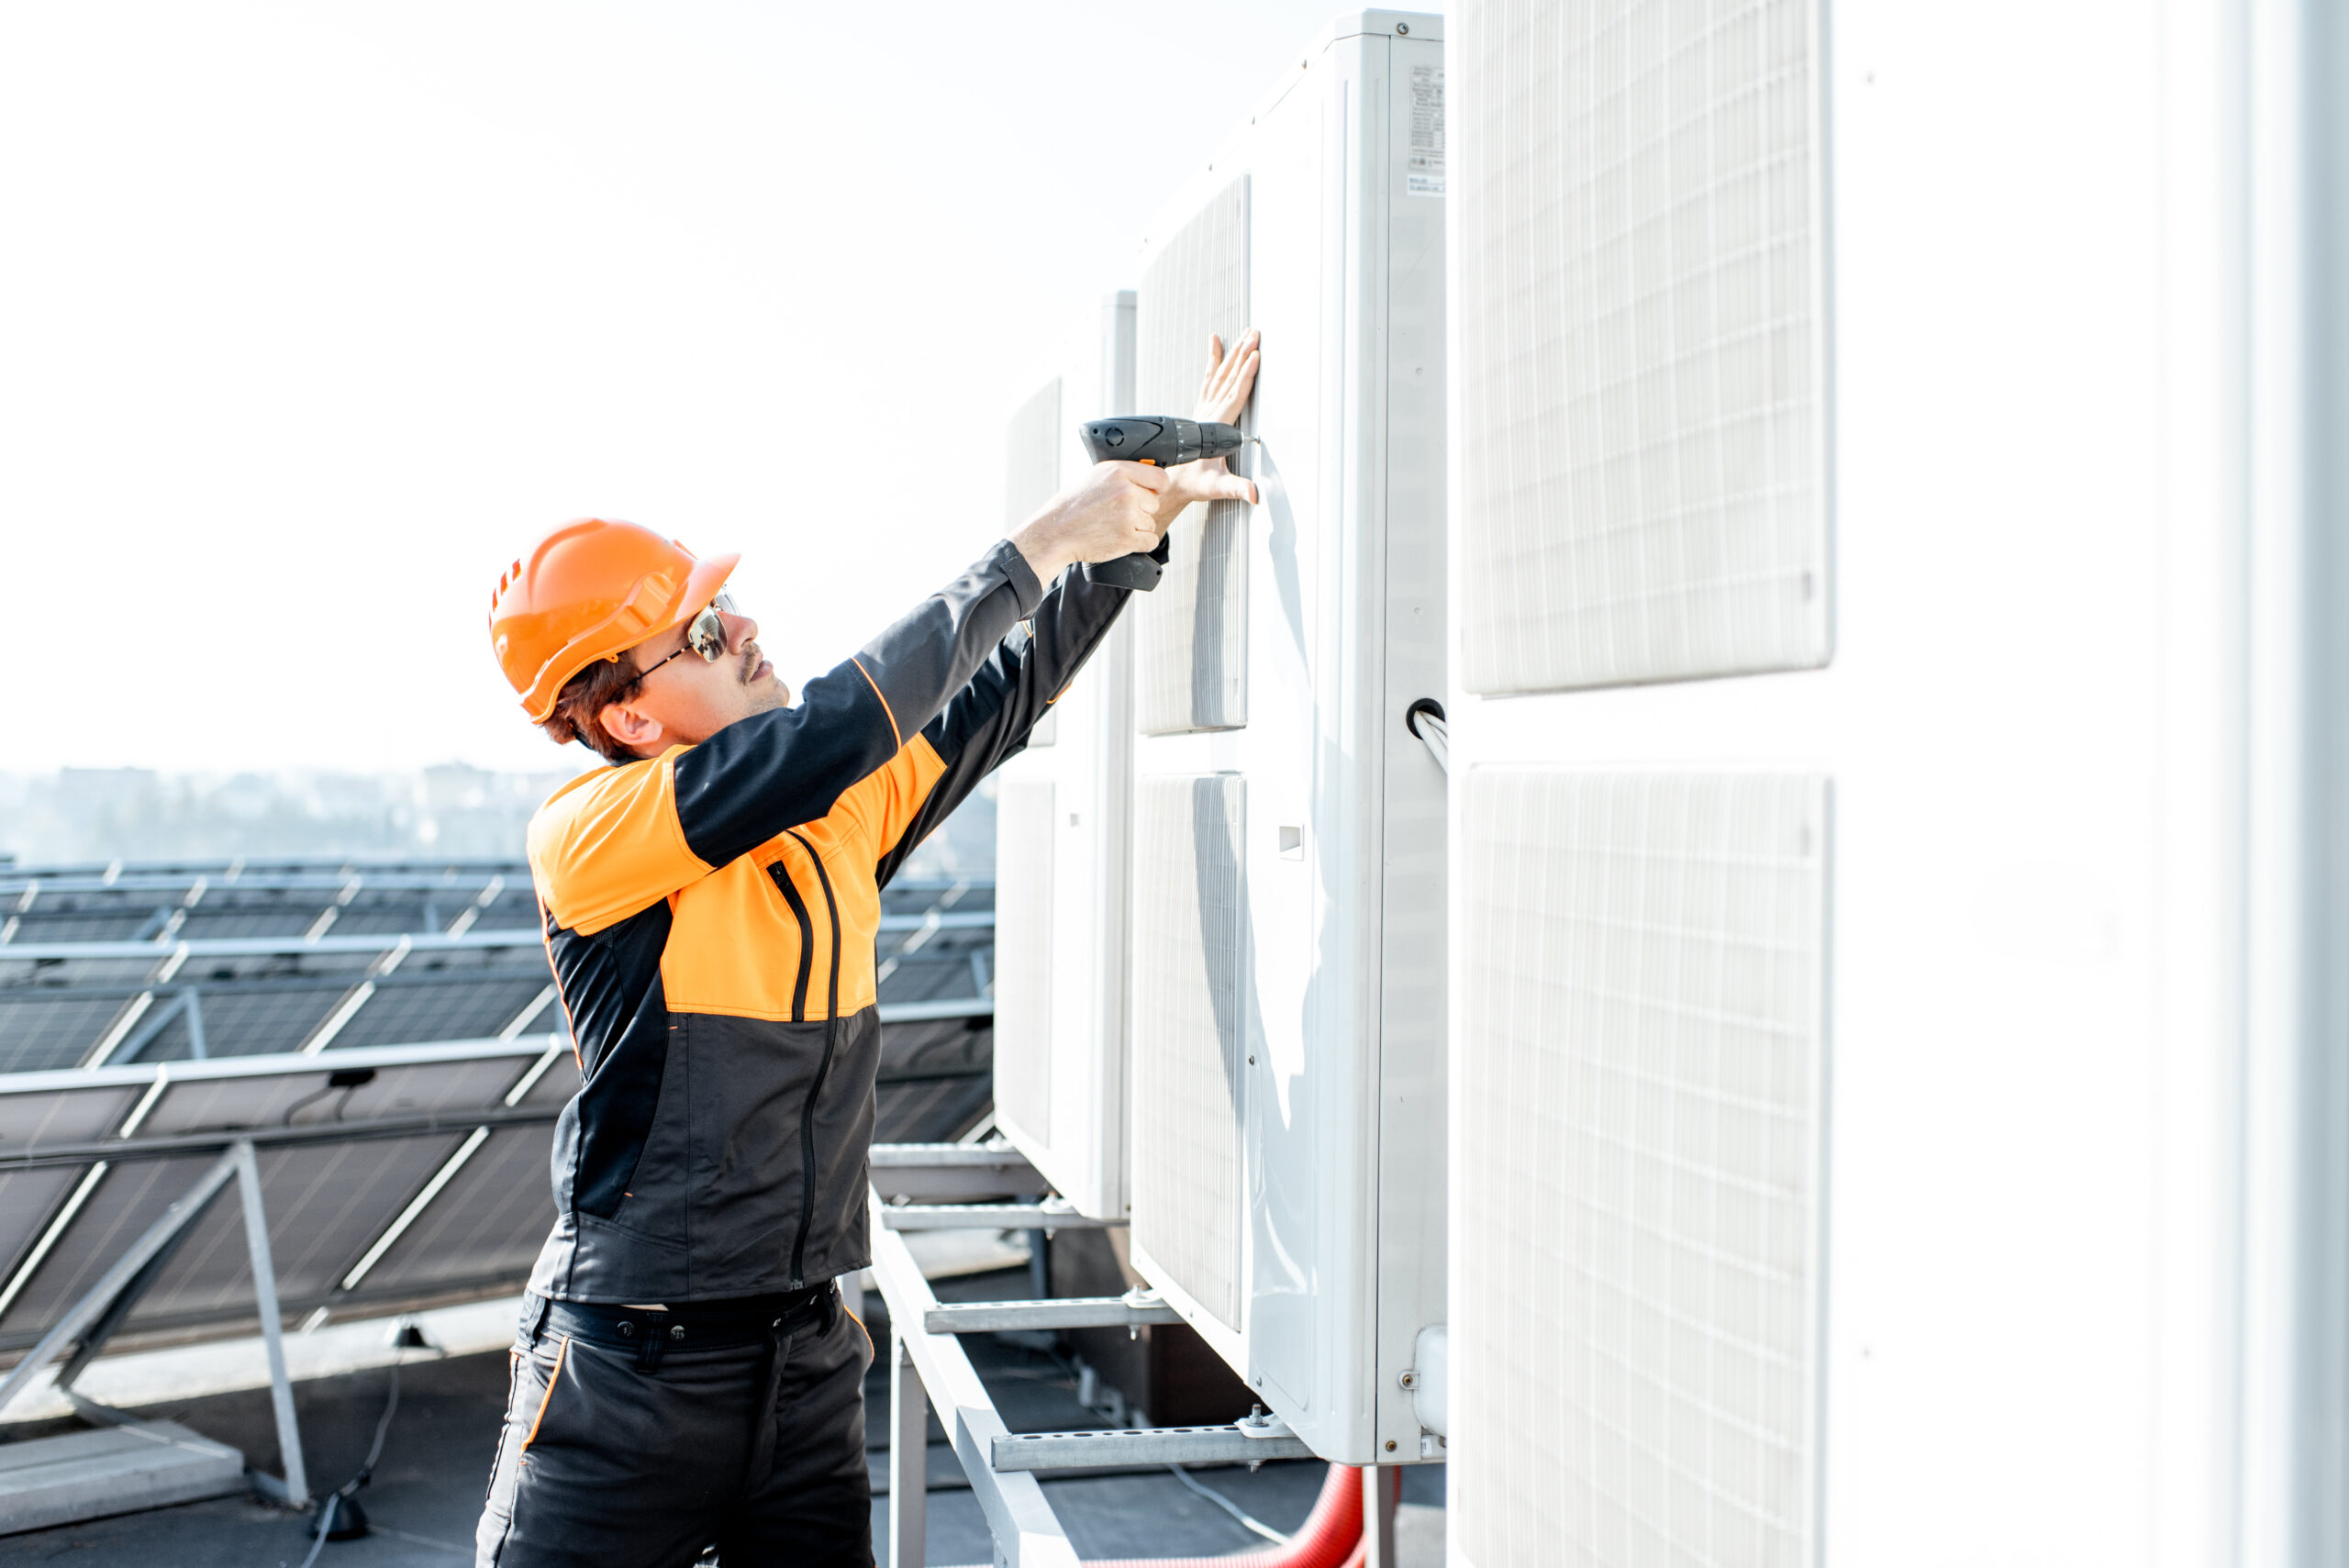 Professional workman in protective clothing installing or reparing outdoor unit of the air conditioner or heat pump on the rooftop